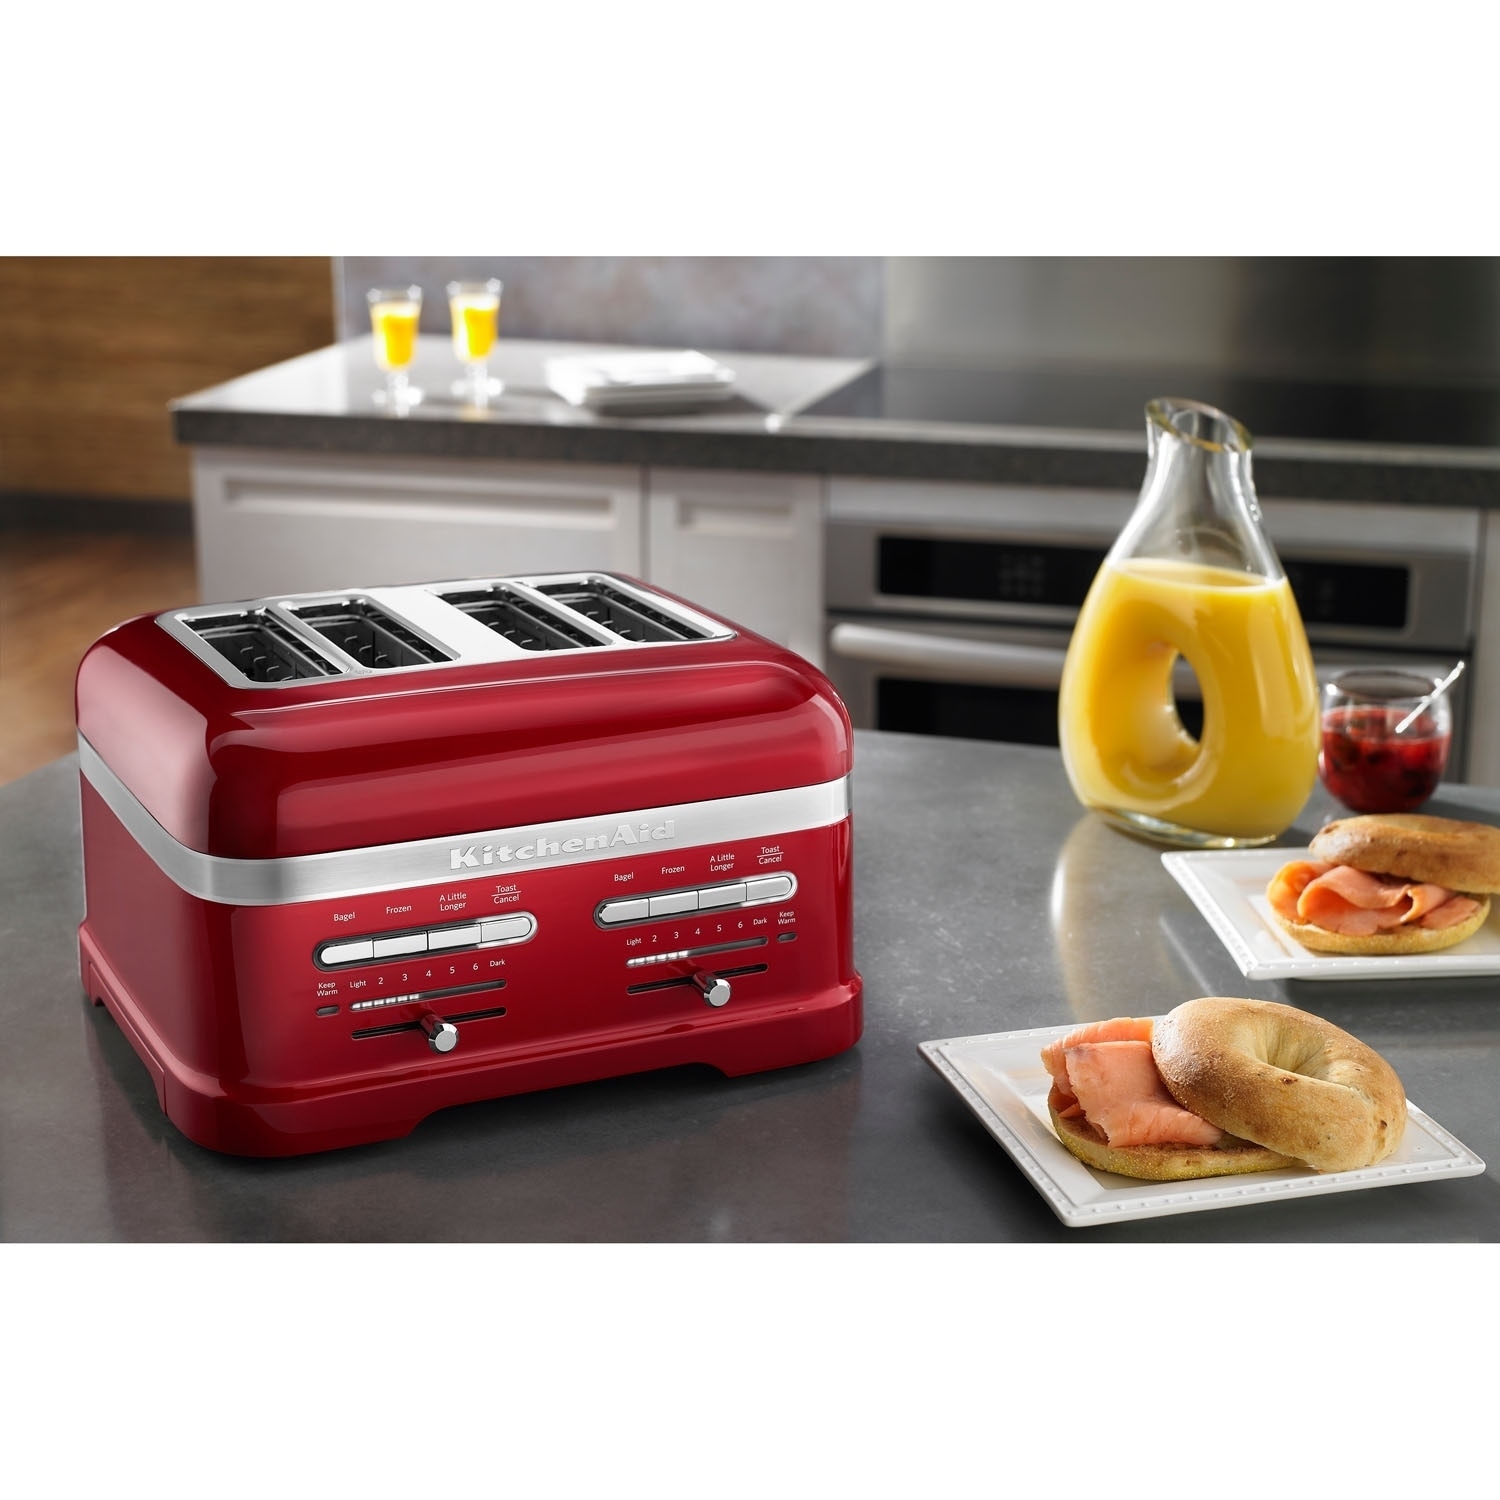 https://ak1.ostkcdn.com/images/products/24224221/KitchenAid-Pro-Line-4-Slice-Automatic-Toaster-with-Dual-Independent-Controls-in-Candy-Apple-Red-374fcc77-00cd-4b4a-9f8a-c1e2ffc10ebc.jpg